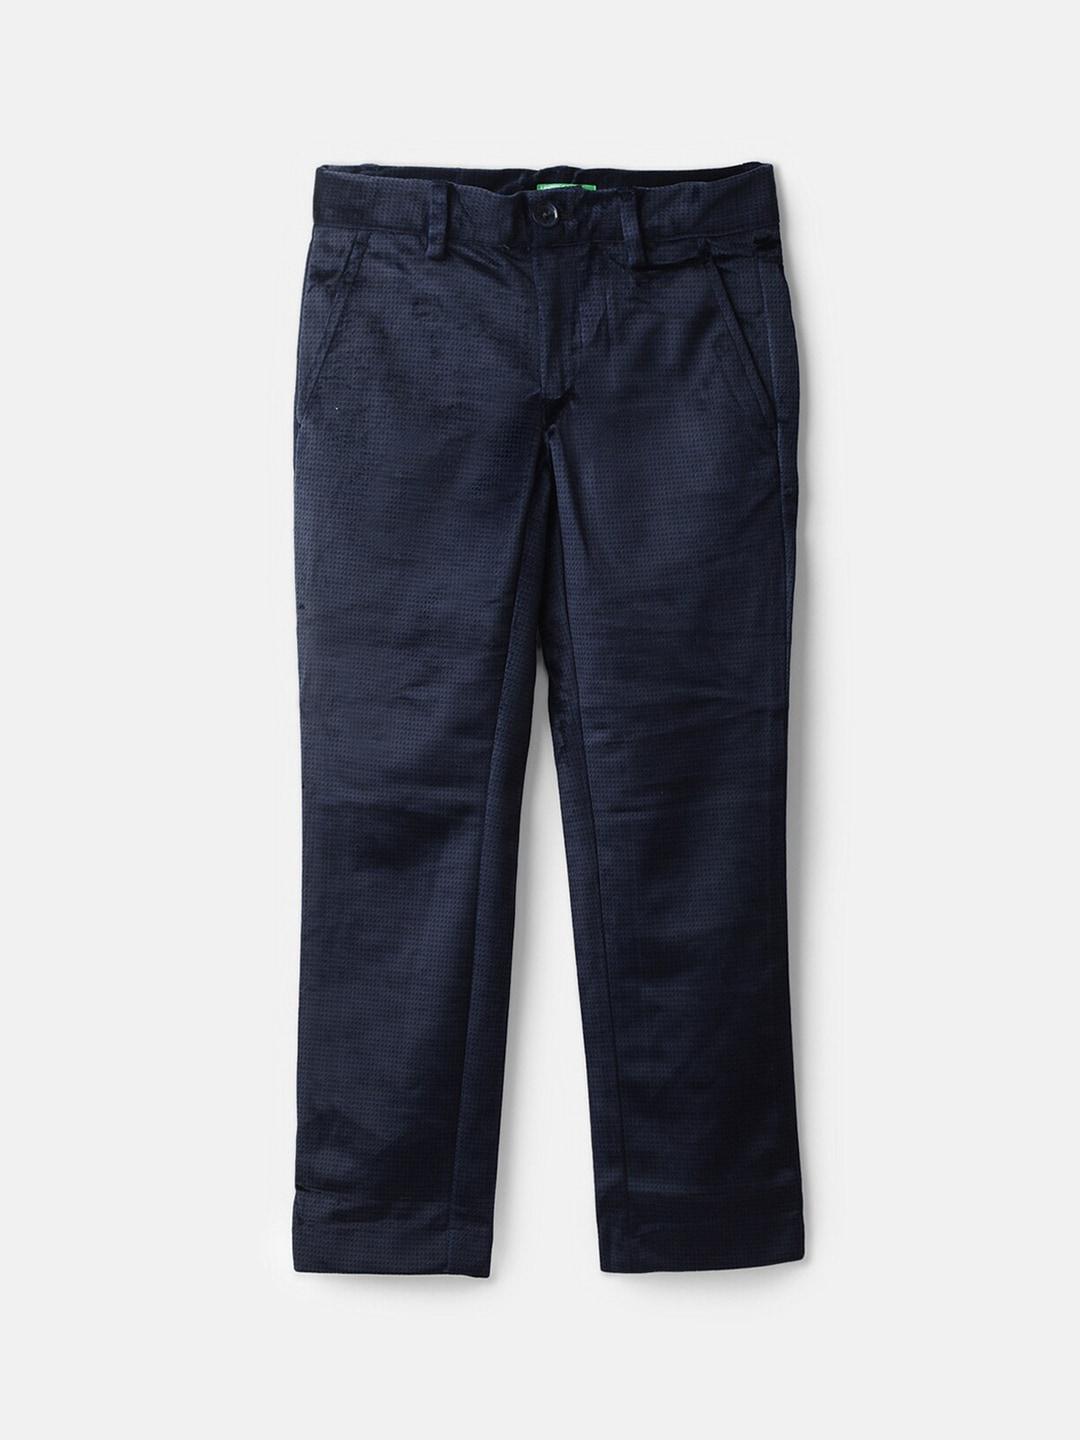 united-colors-of-benetton-boys-navy-blue-trousers